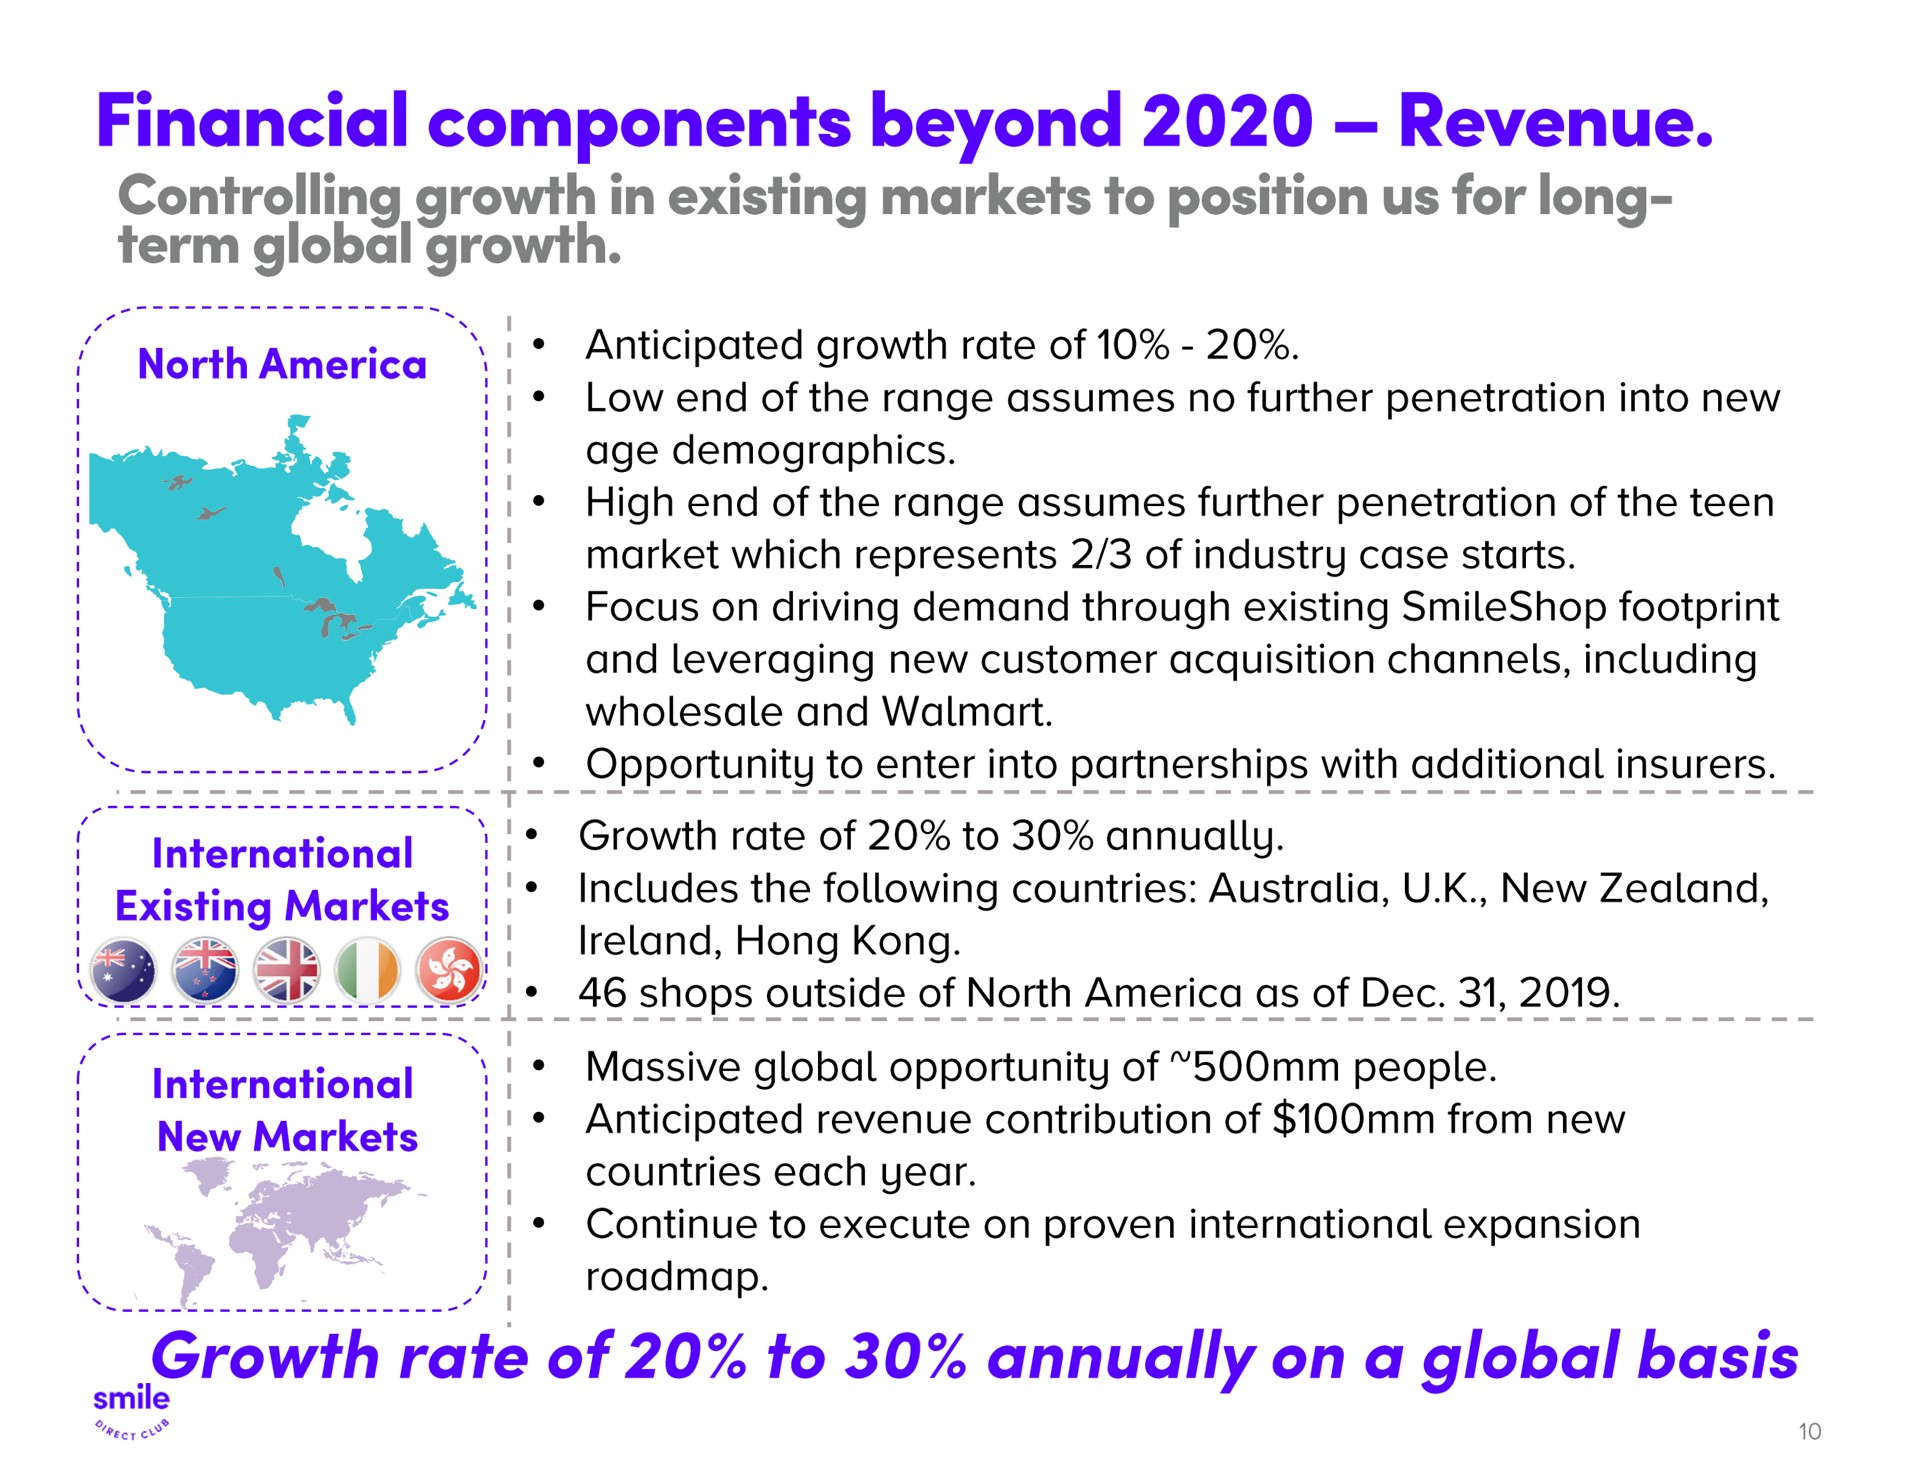 financial components beyond revenue controlling growth in existing markets to position us for long term global growth rate of to annually on a global basis | SmileDirectClub